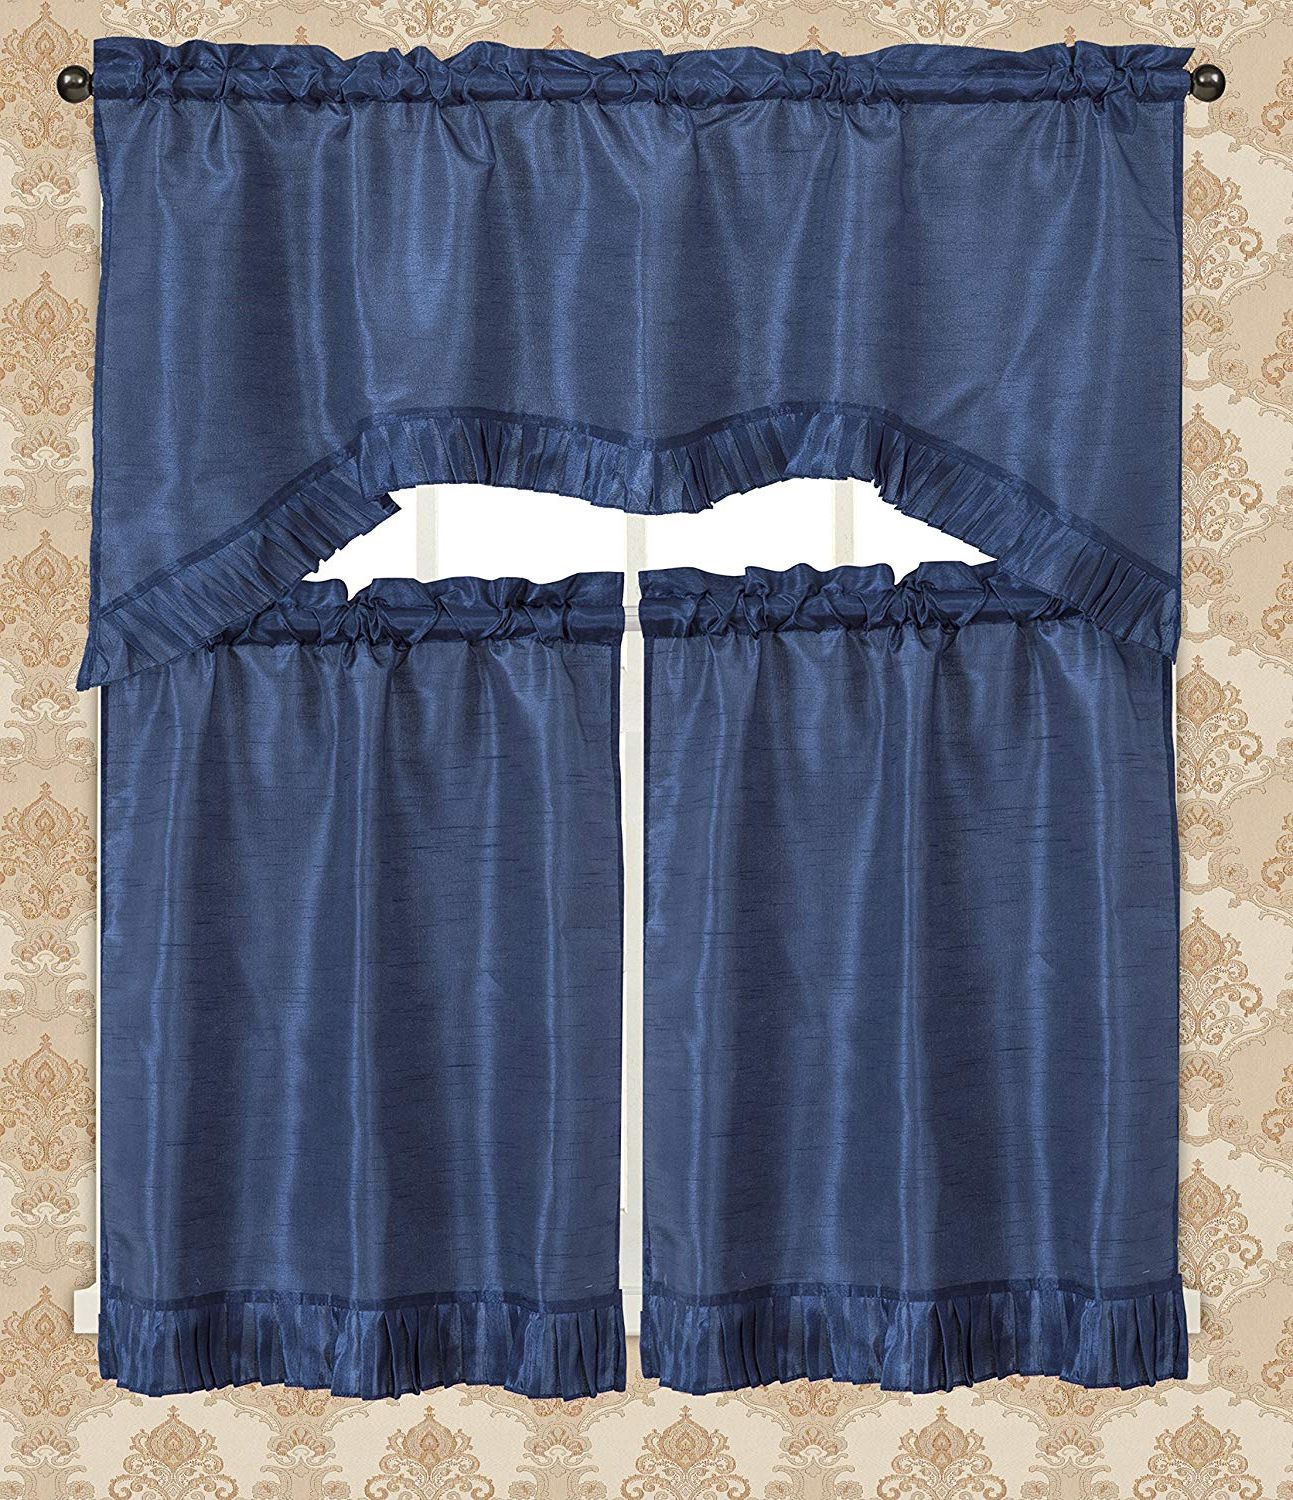 Bermuda Ruffle Kitchen Curtain Tier Sets Throughout Most Current Rt Designers Collection Bermuda Ruffle Kitchen Window Curtain Navy (View 3 of 20)